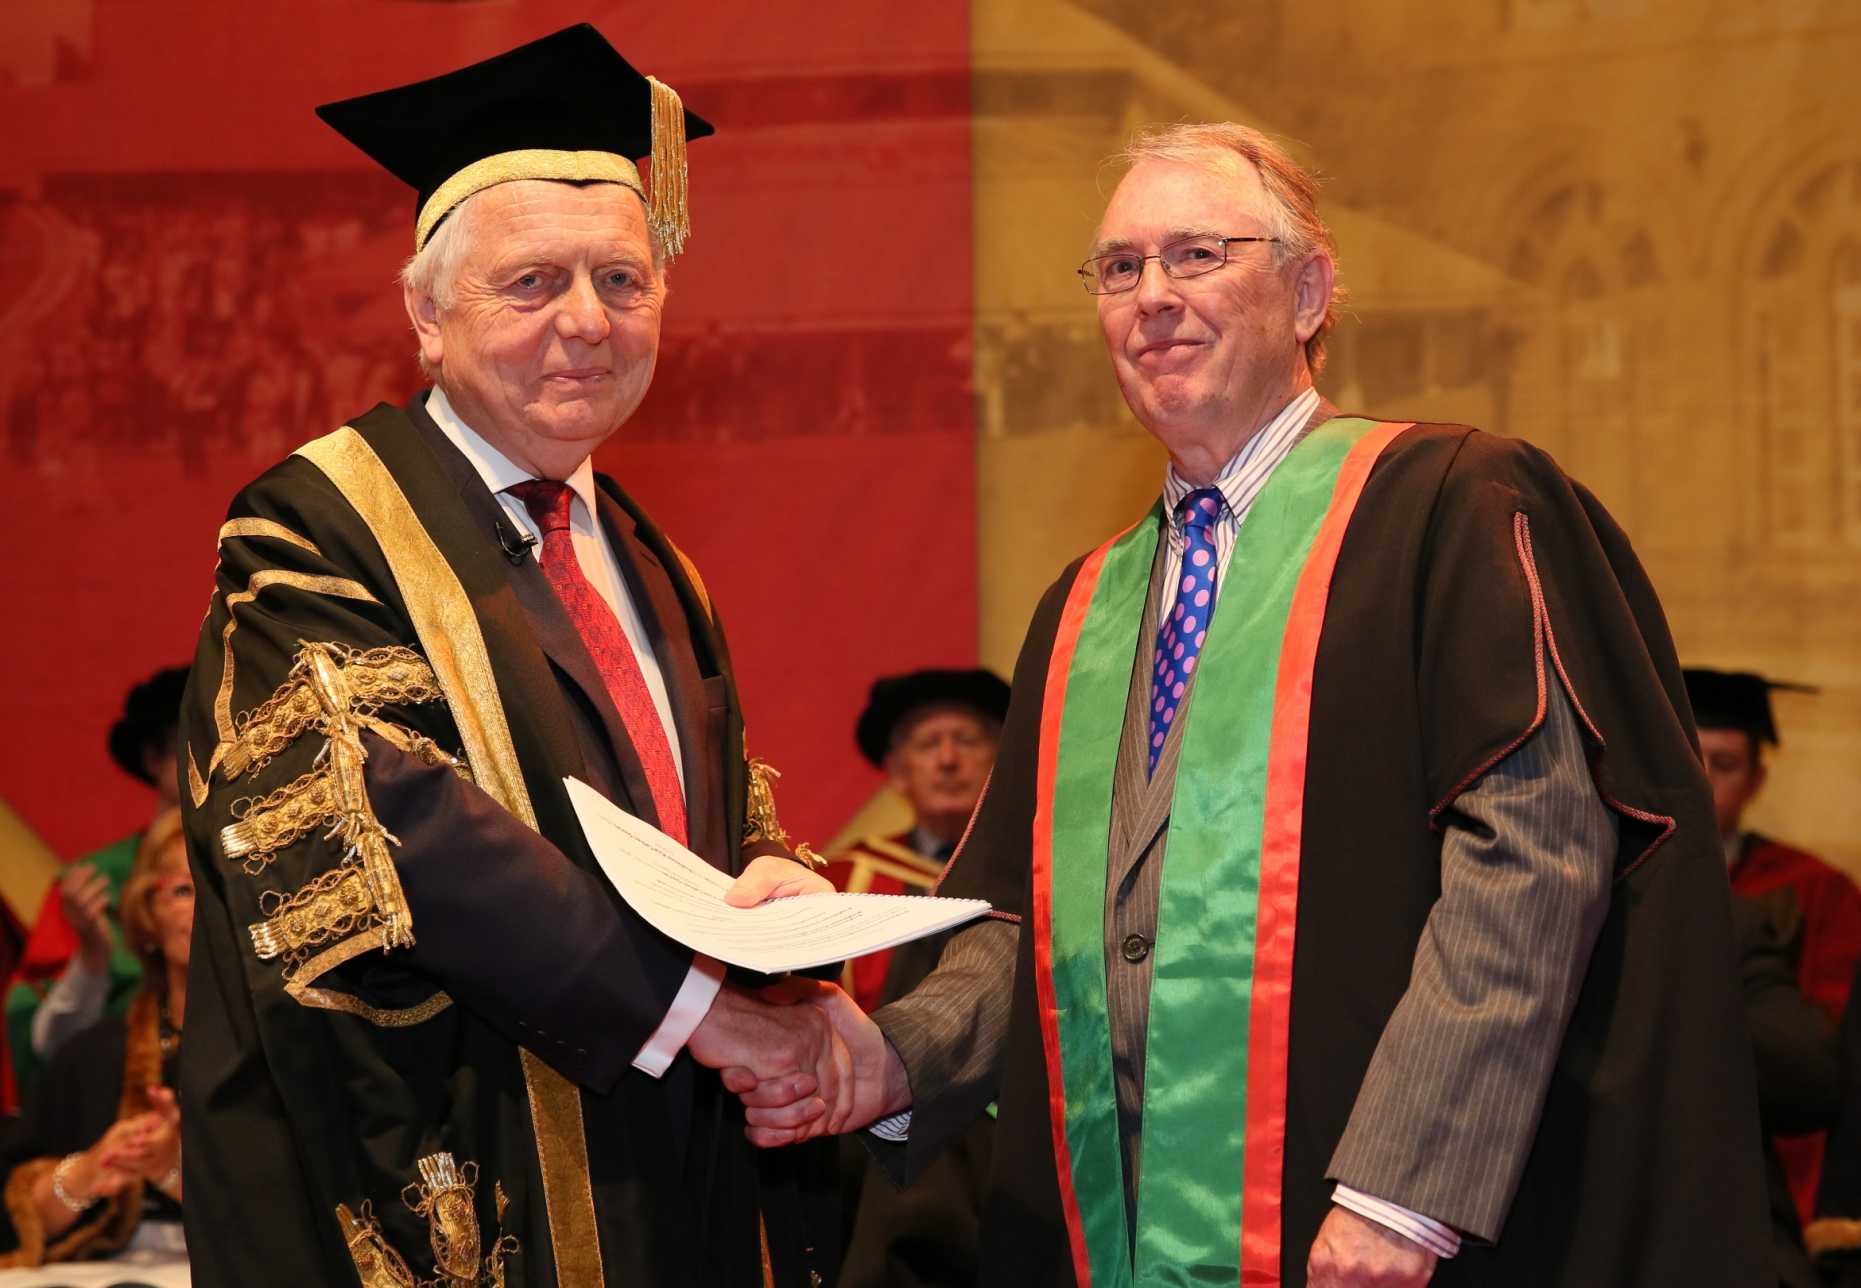 Enlarged view: Sir Emyr Jones Parry, Chancellor of Aberystwyth University presents an Honorary Doctorate to Professor Huw C. Davies